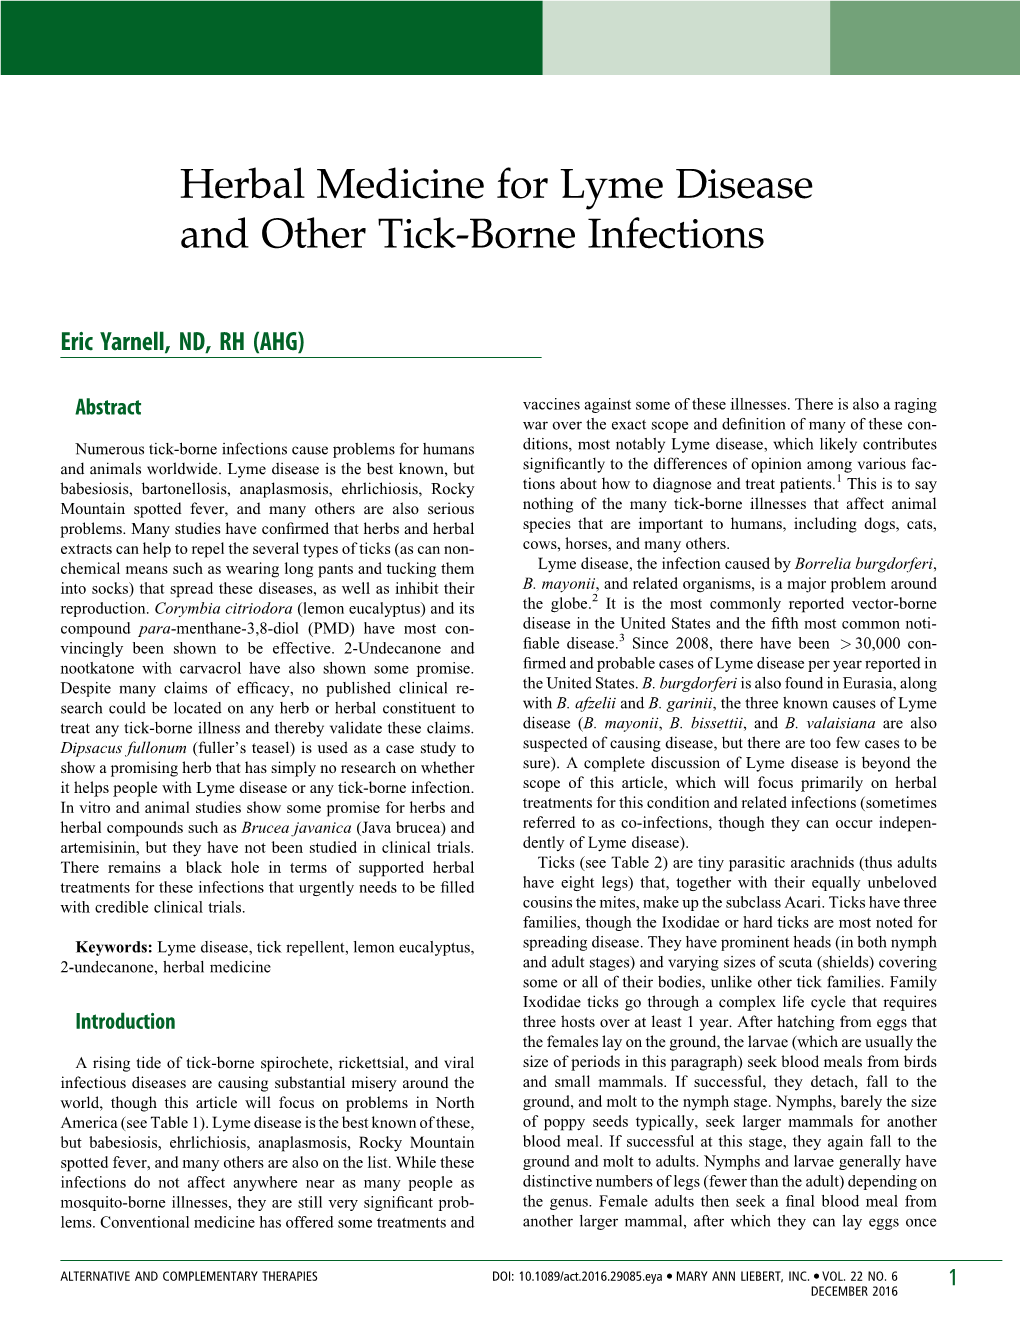 Herbal Medicine for Lyme Disease and Other Tick-Borne Infections